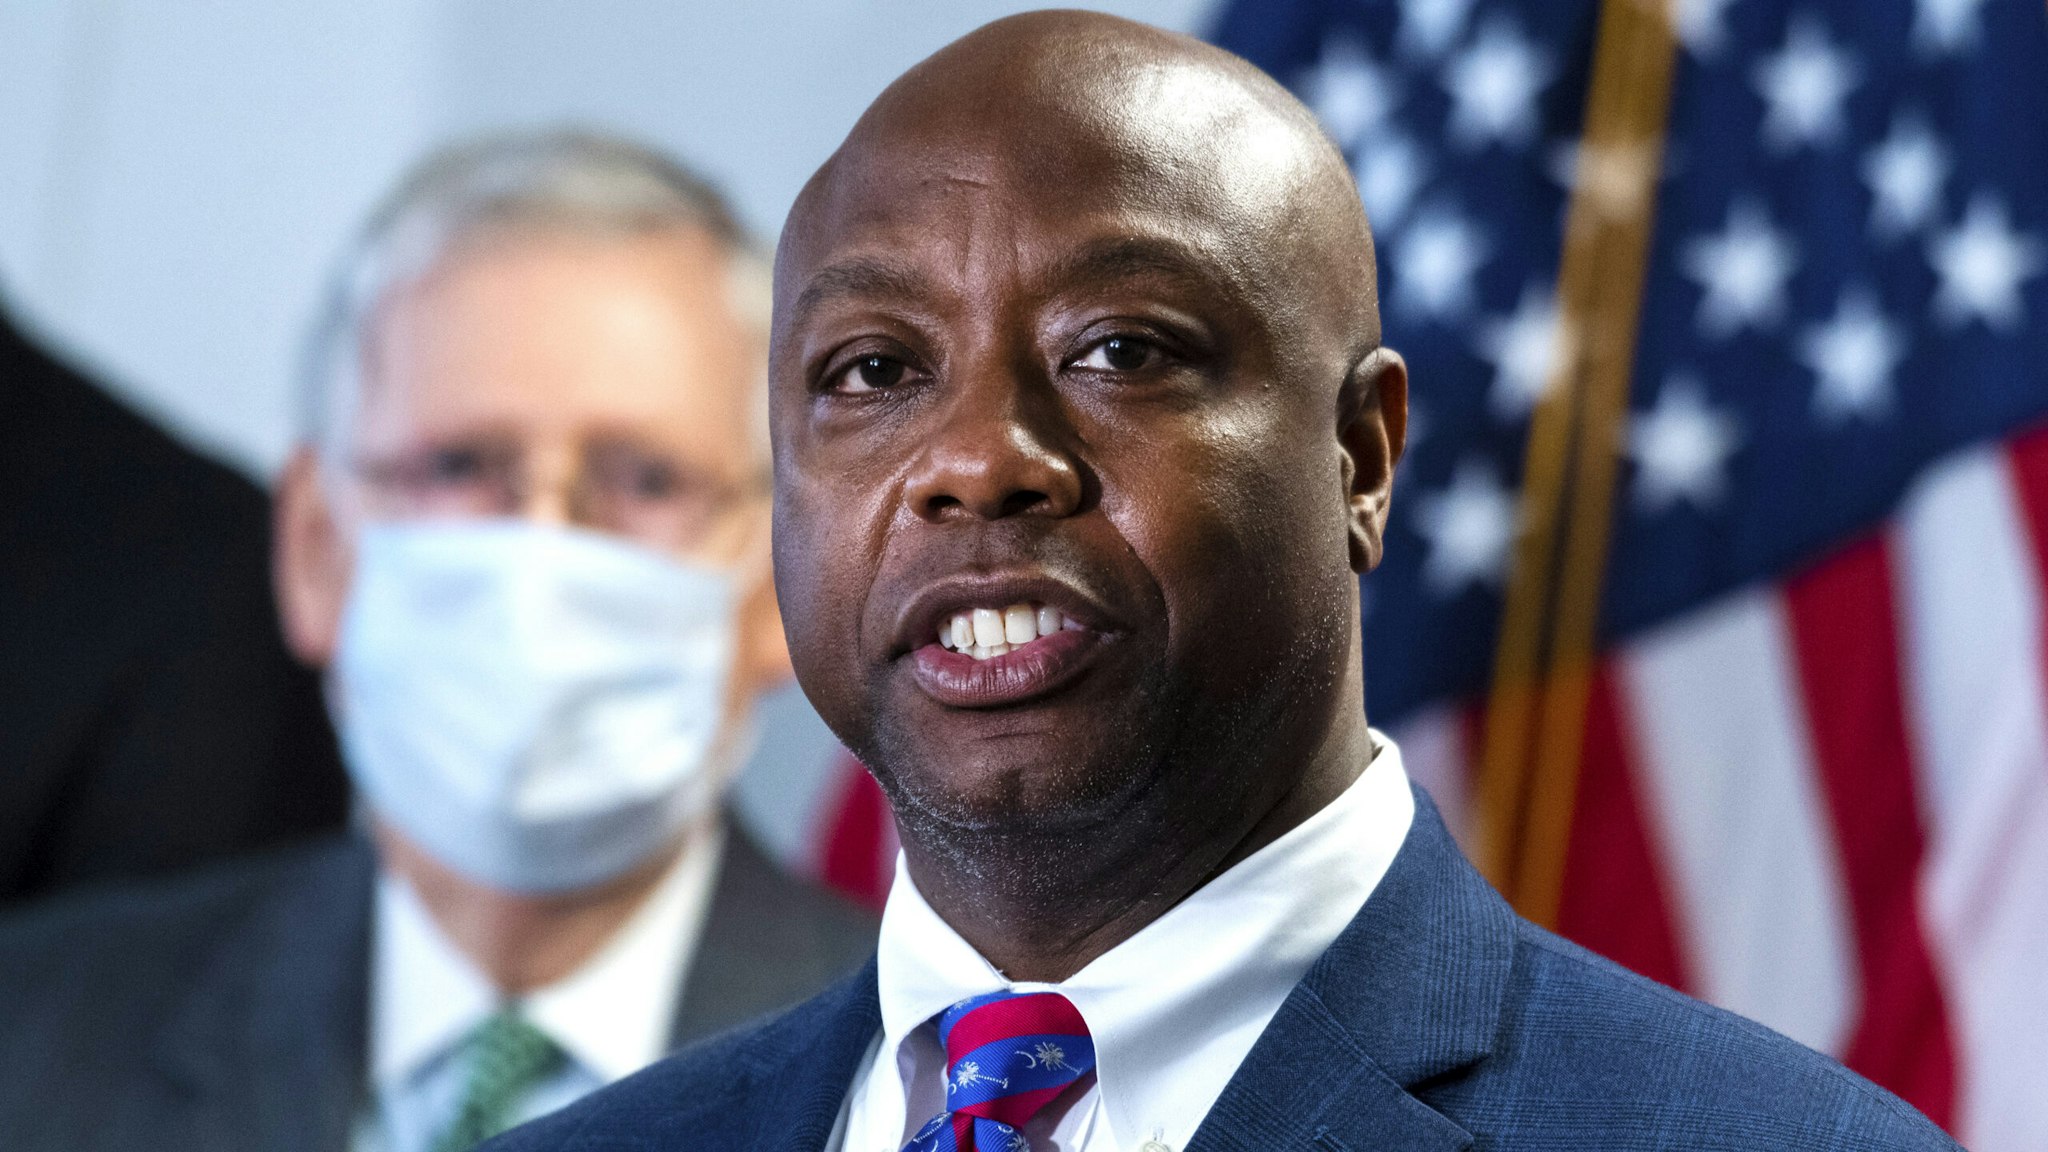 UNITED STATES - JUNE 23: Sen. Tim Scott, R-S.C., right, and Senate Majority Leader Mitch McConnell, R-Ky., conduct a news conference after the Senate Republican Policy luncheon in Hart Building on Tuesday, June 23, 2020.